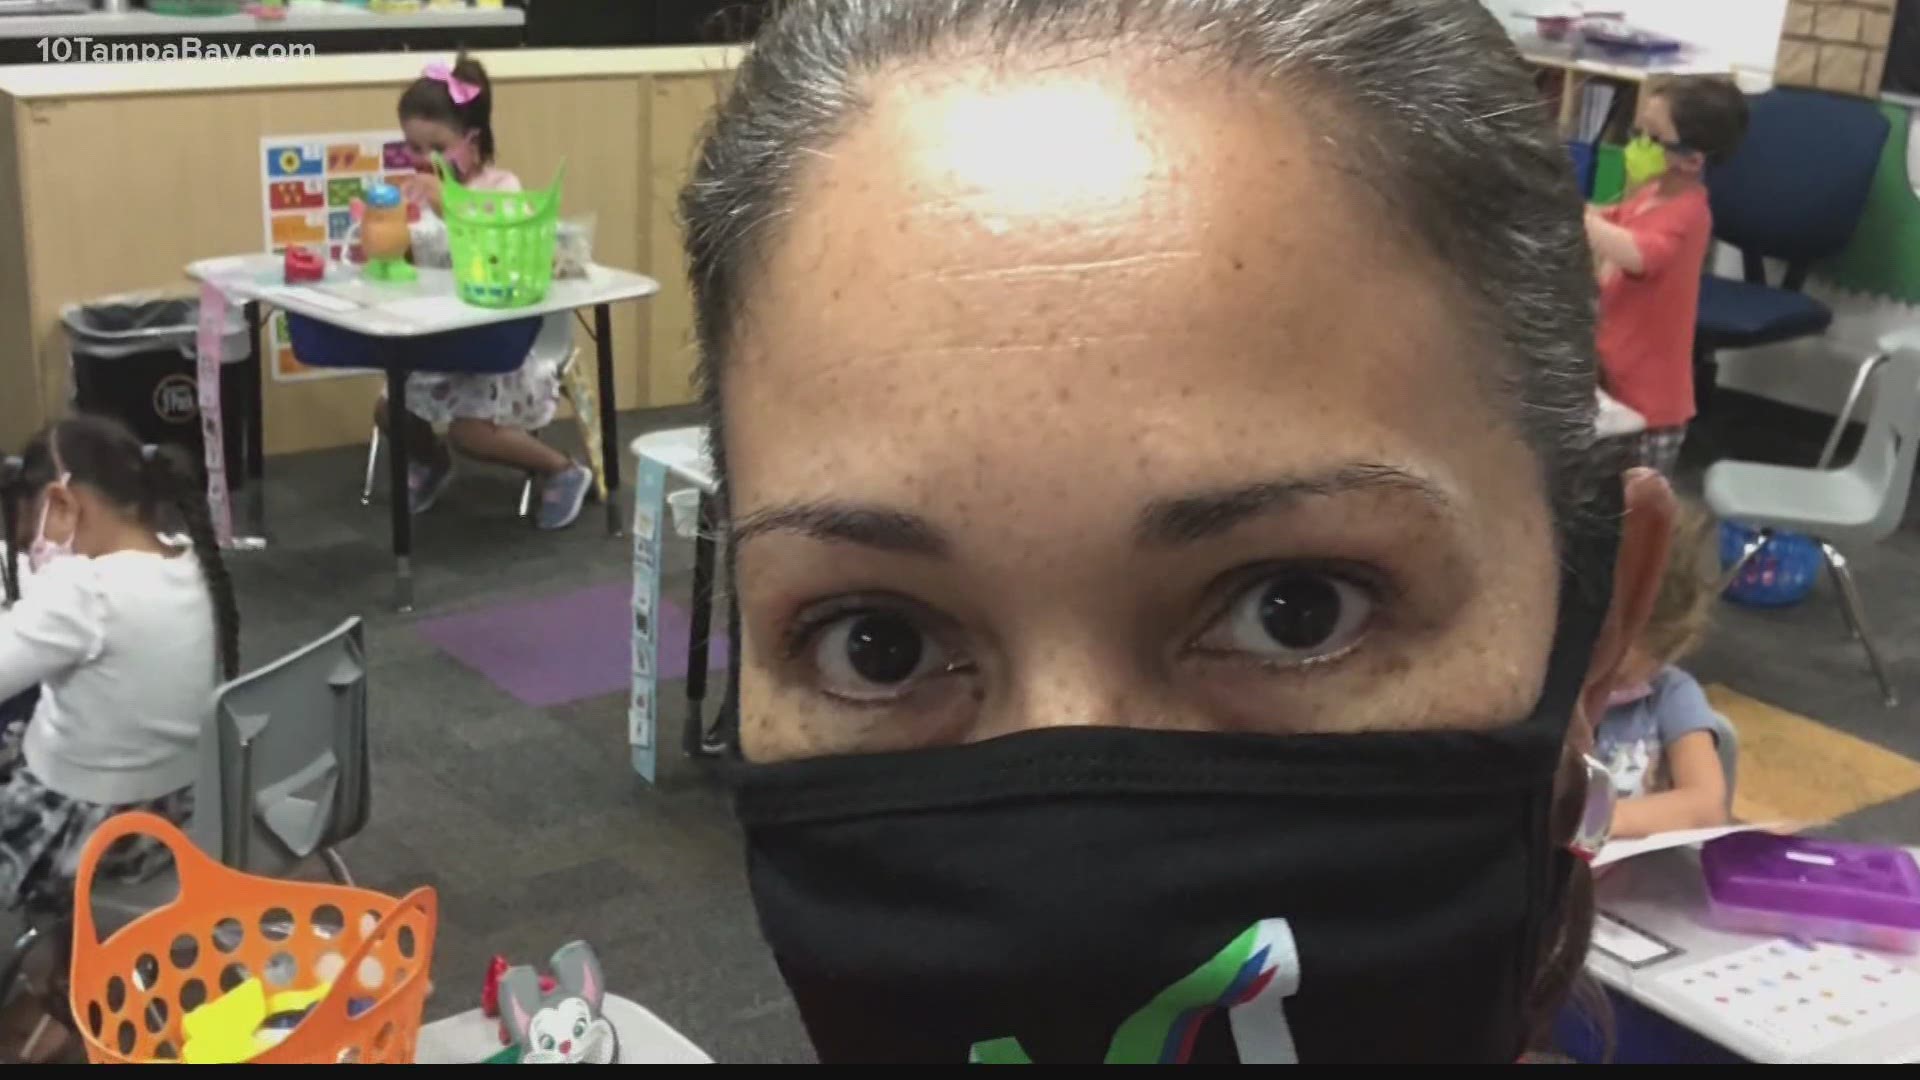 From wearing a mask all day and changing protocols, teachers across Tampa Bay opened up about their first few weeks back.